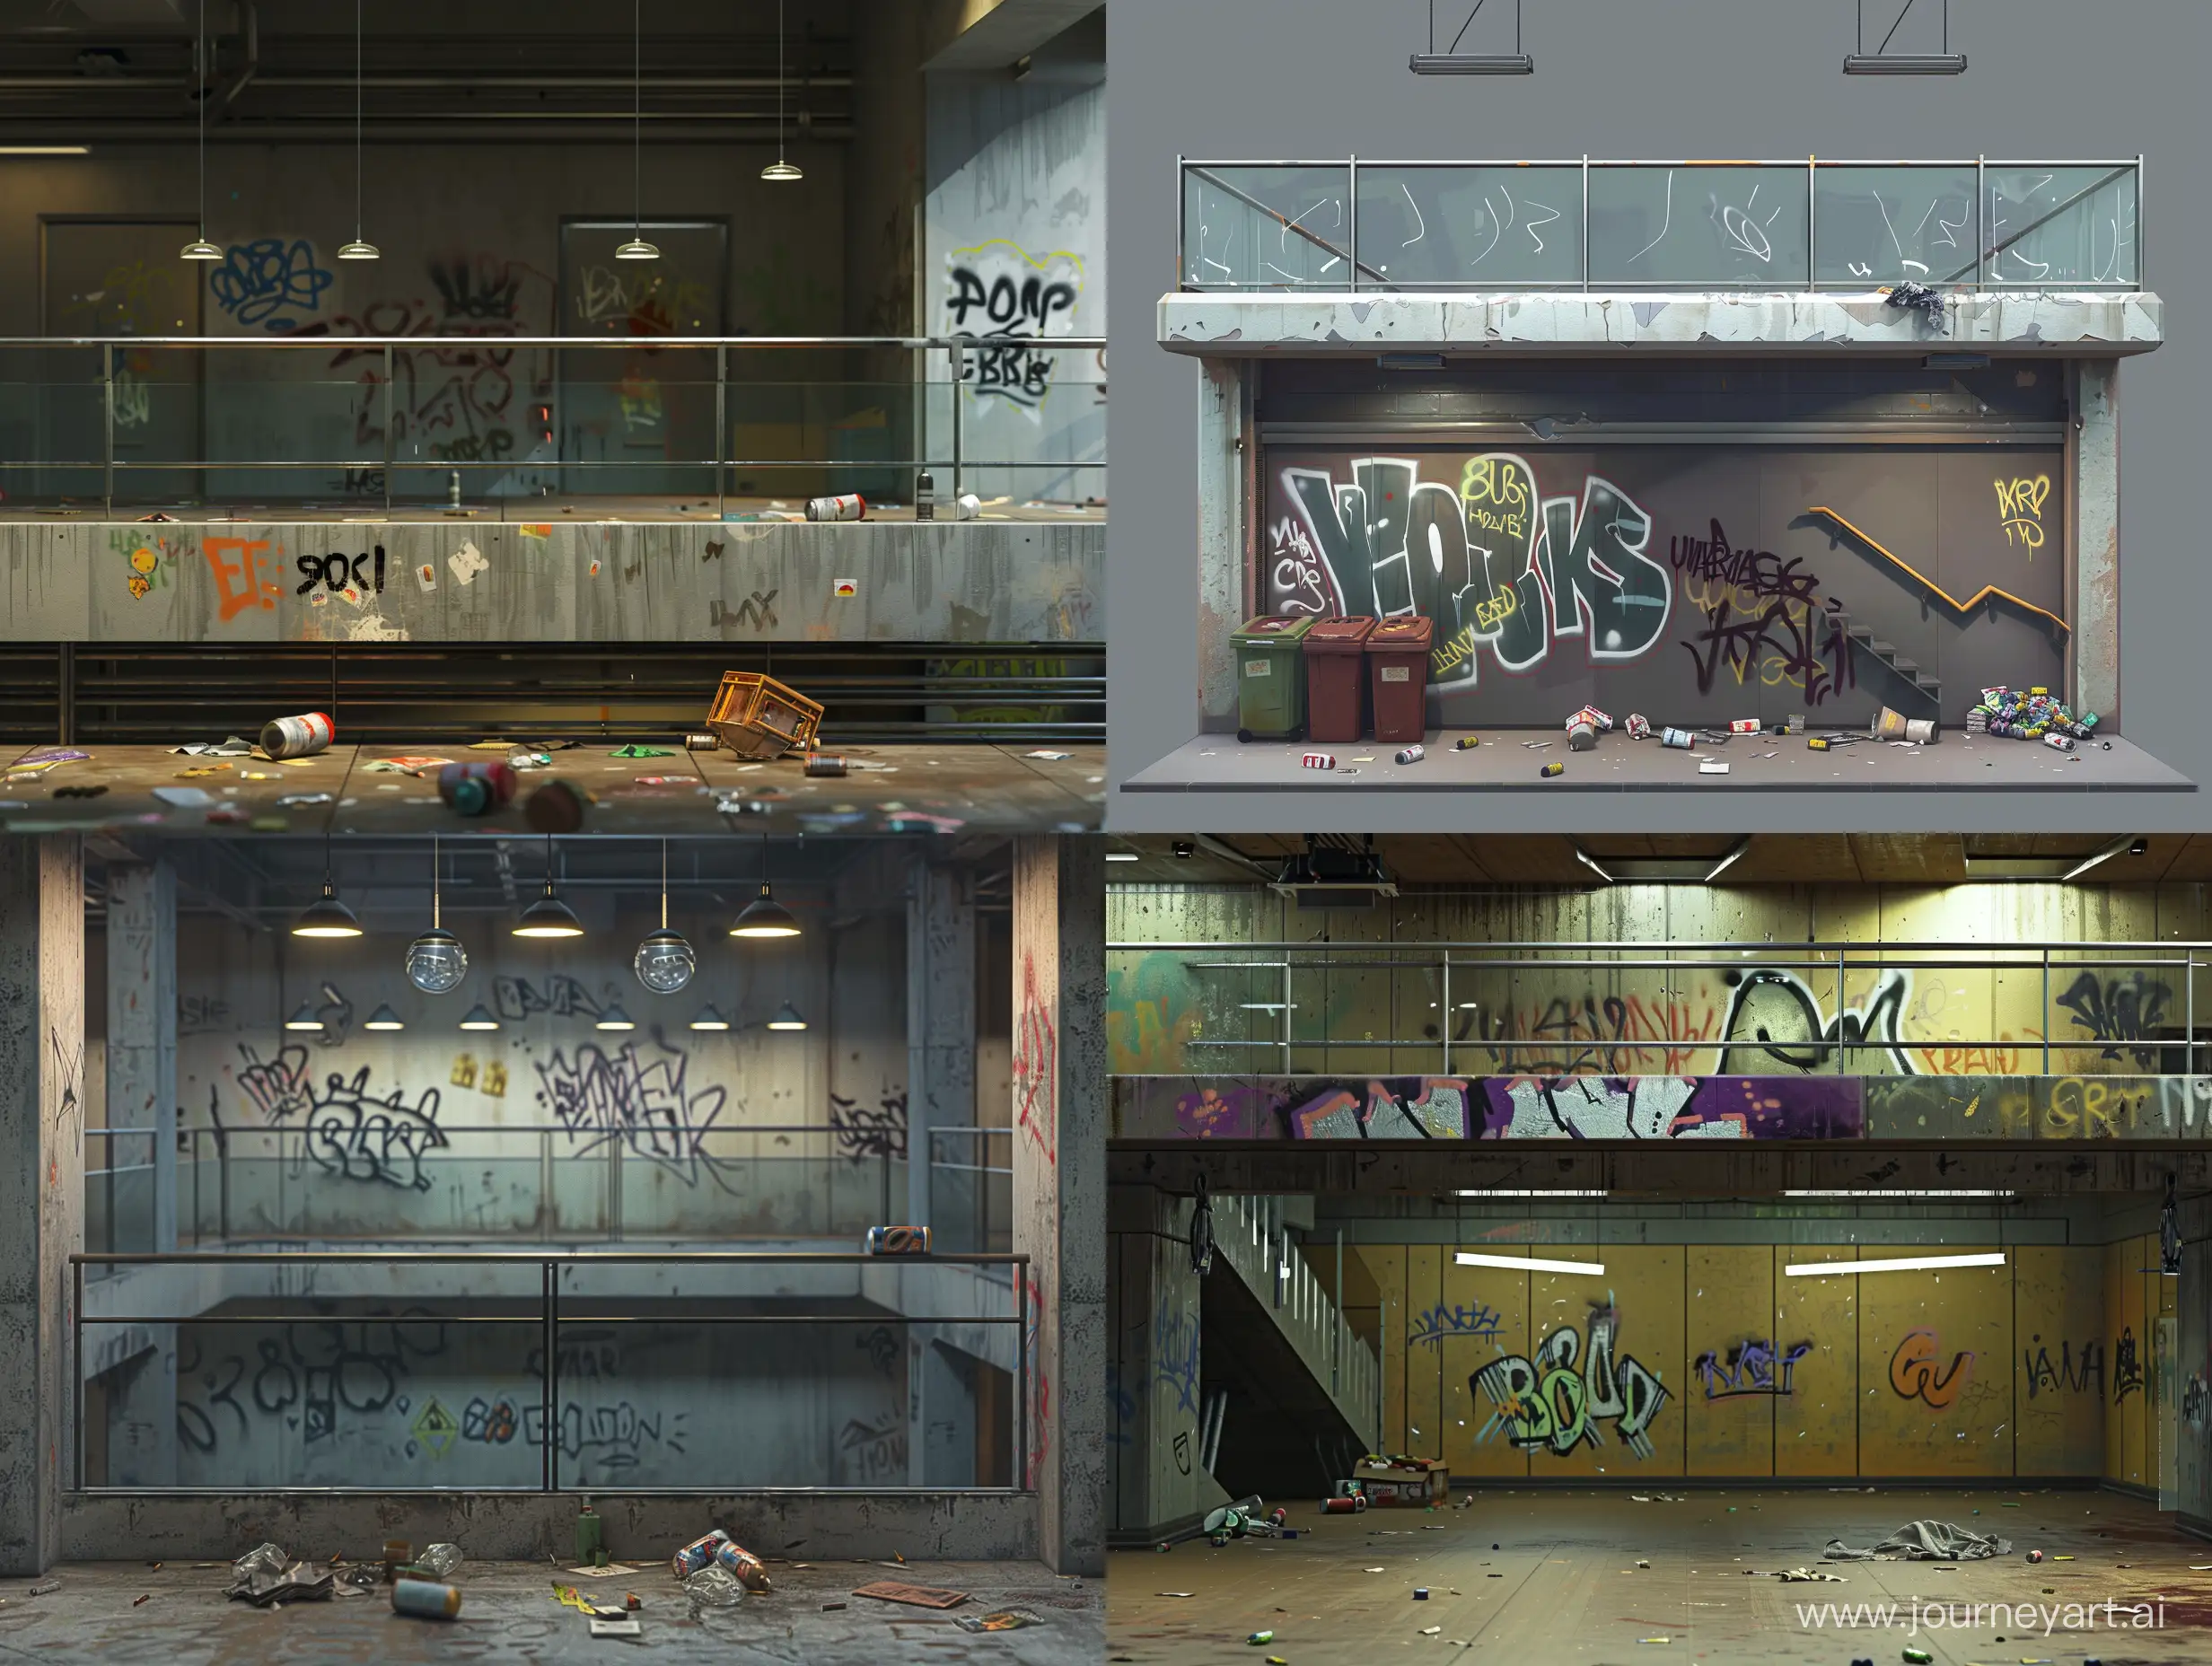 PostApocalyptic-Brutalist-Office-Interior-with-Suspended-Lighting-and-Graffiti